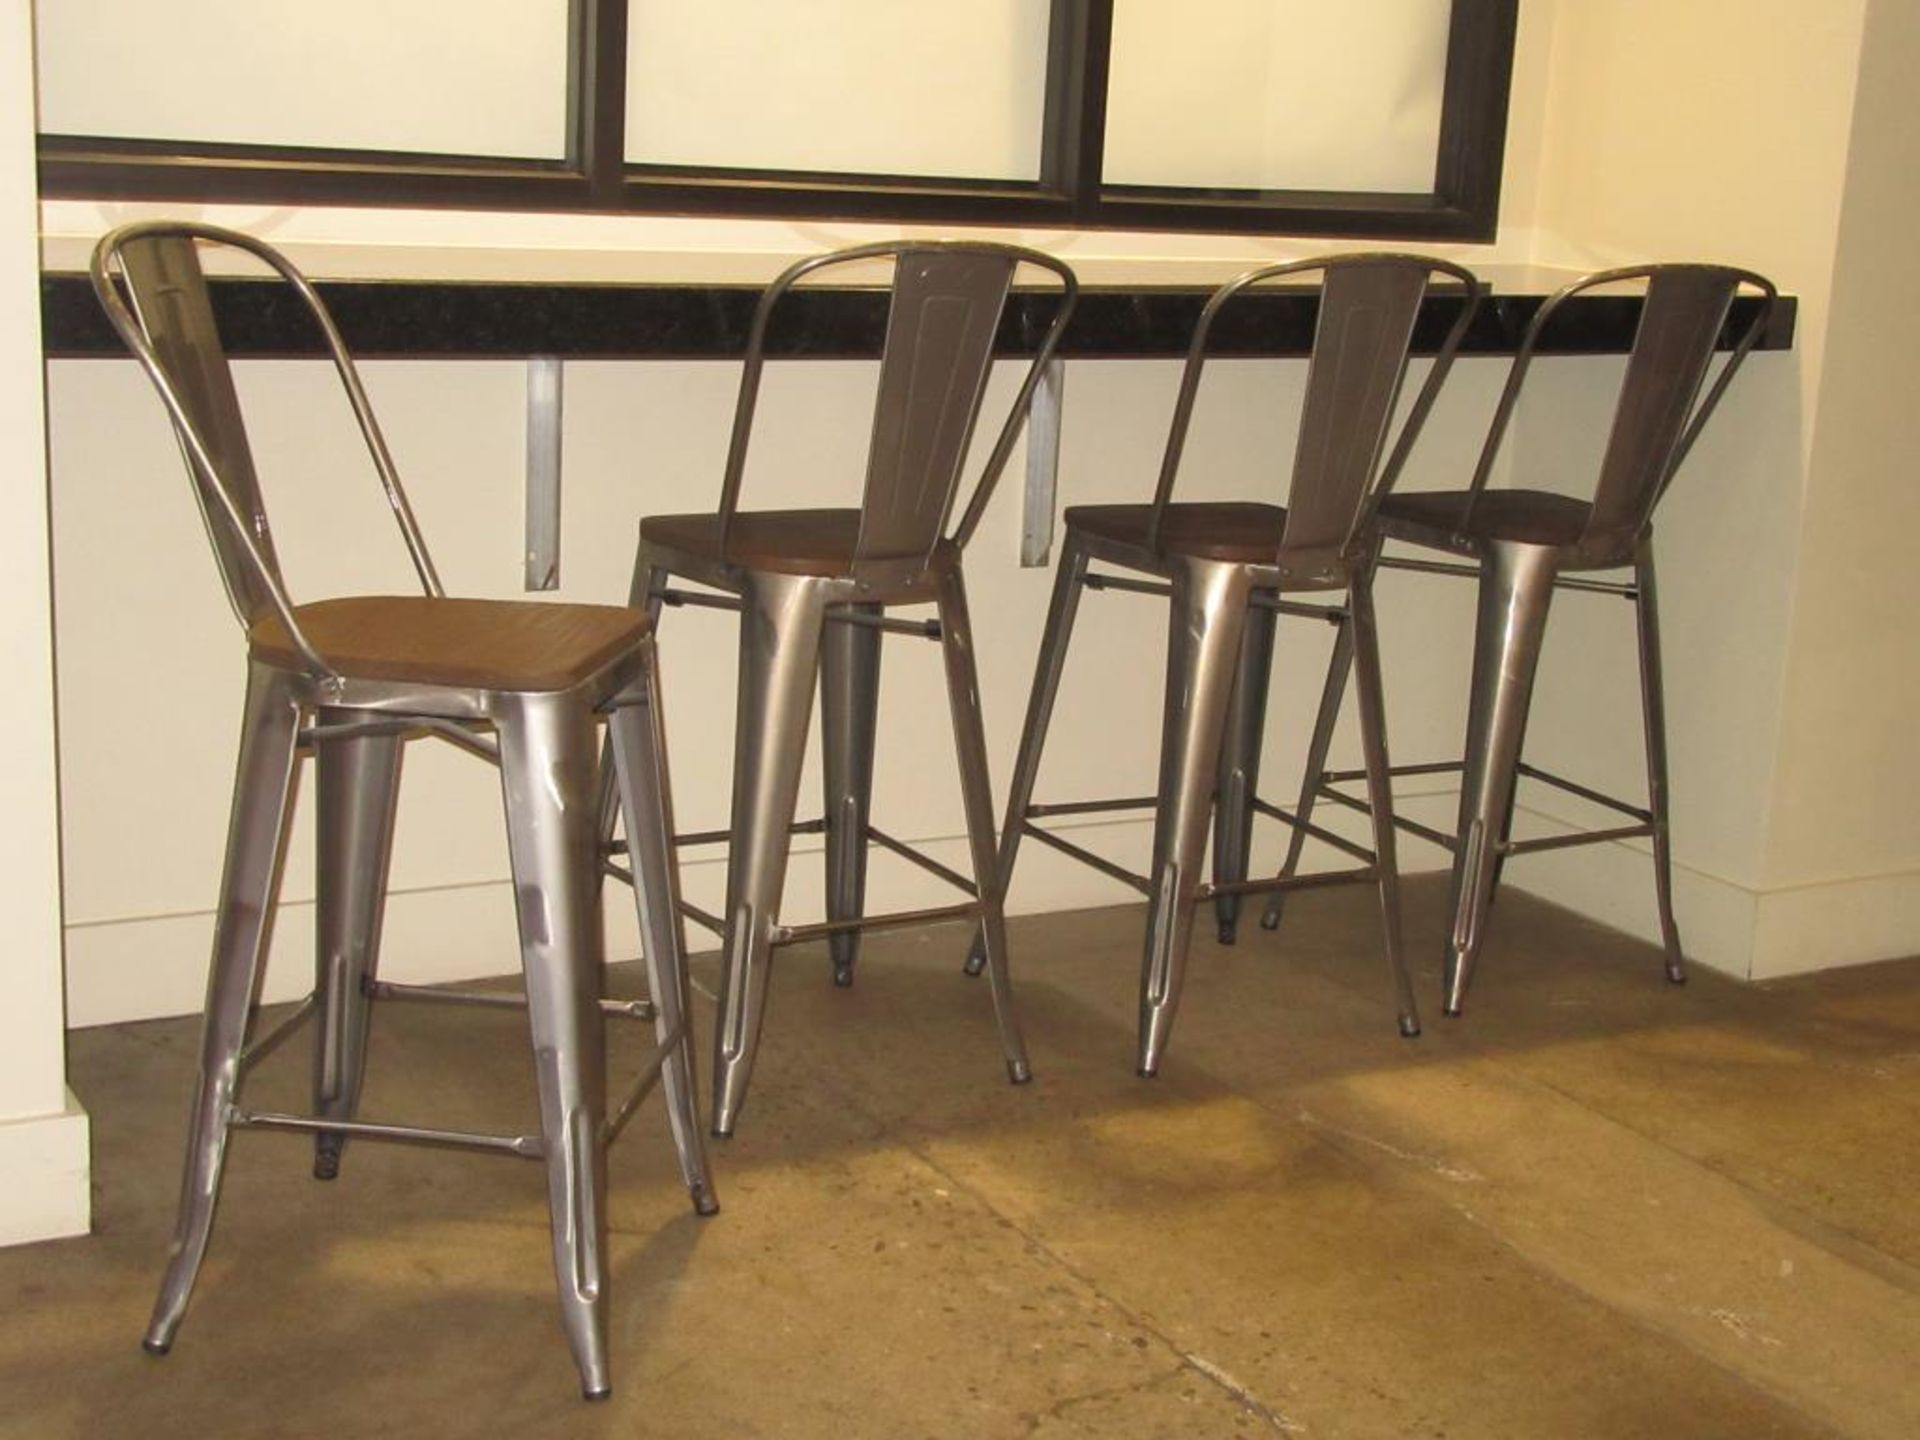 Barstool Chairs - Image 2 of 3